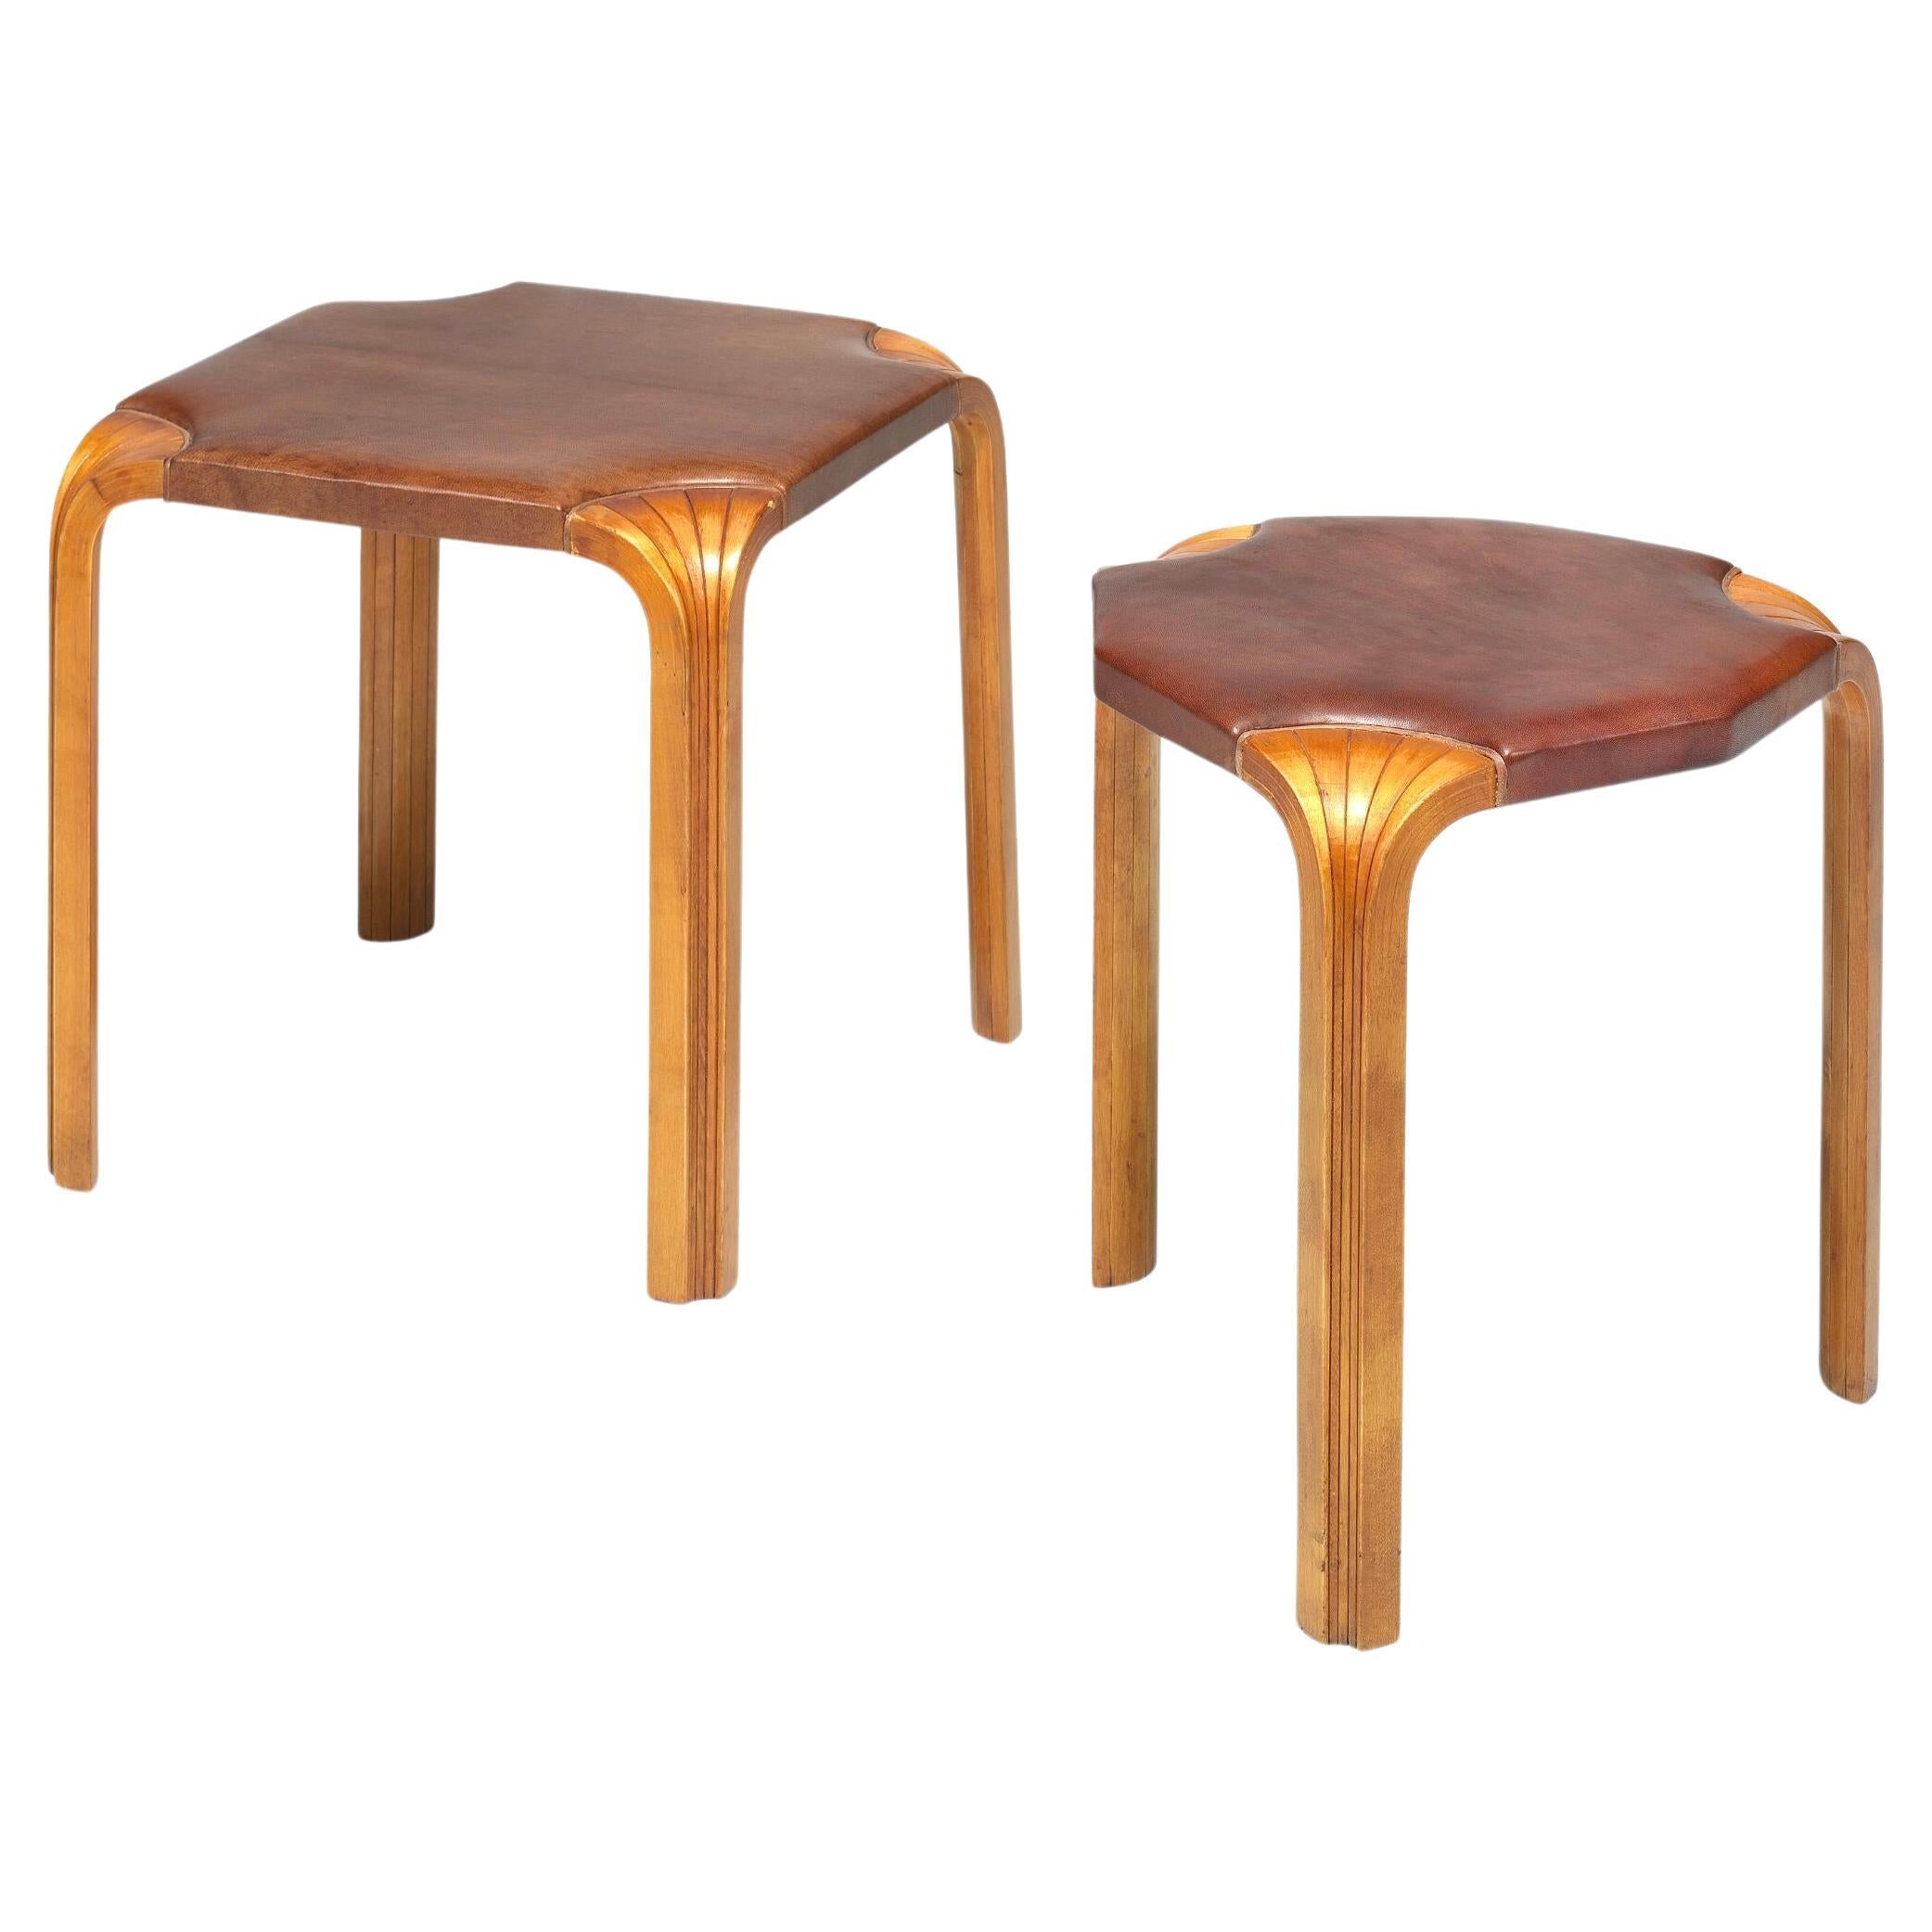 1954 Alvar Aalto stool model X601 & X602 in patinated birch and Niger leather For Sale